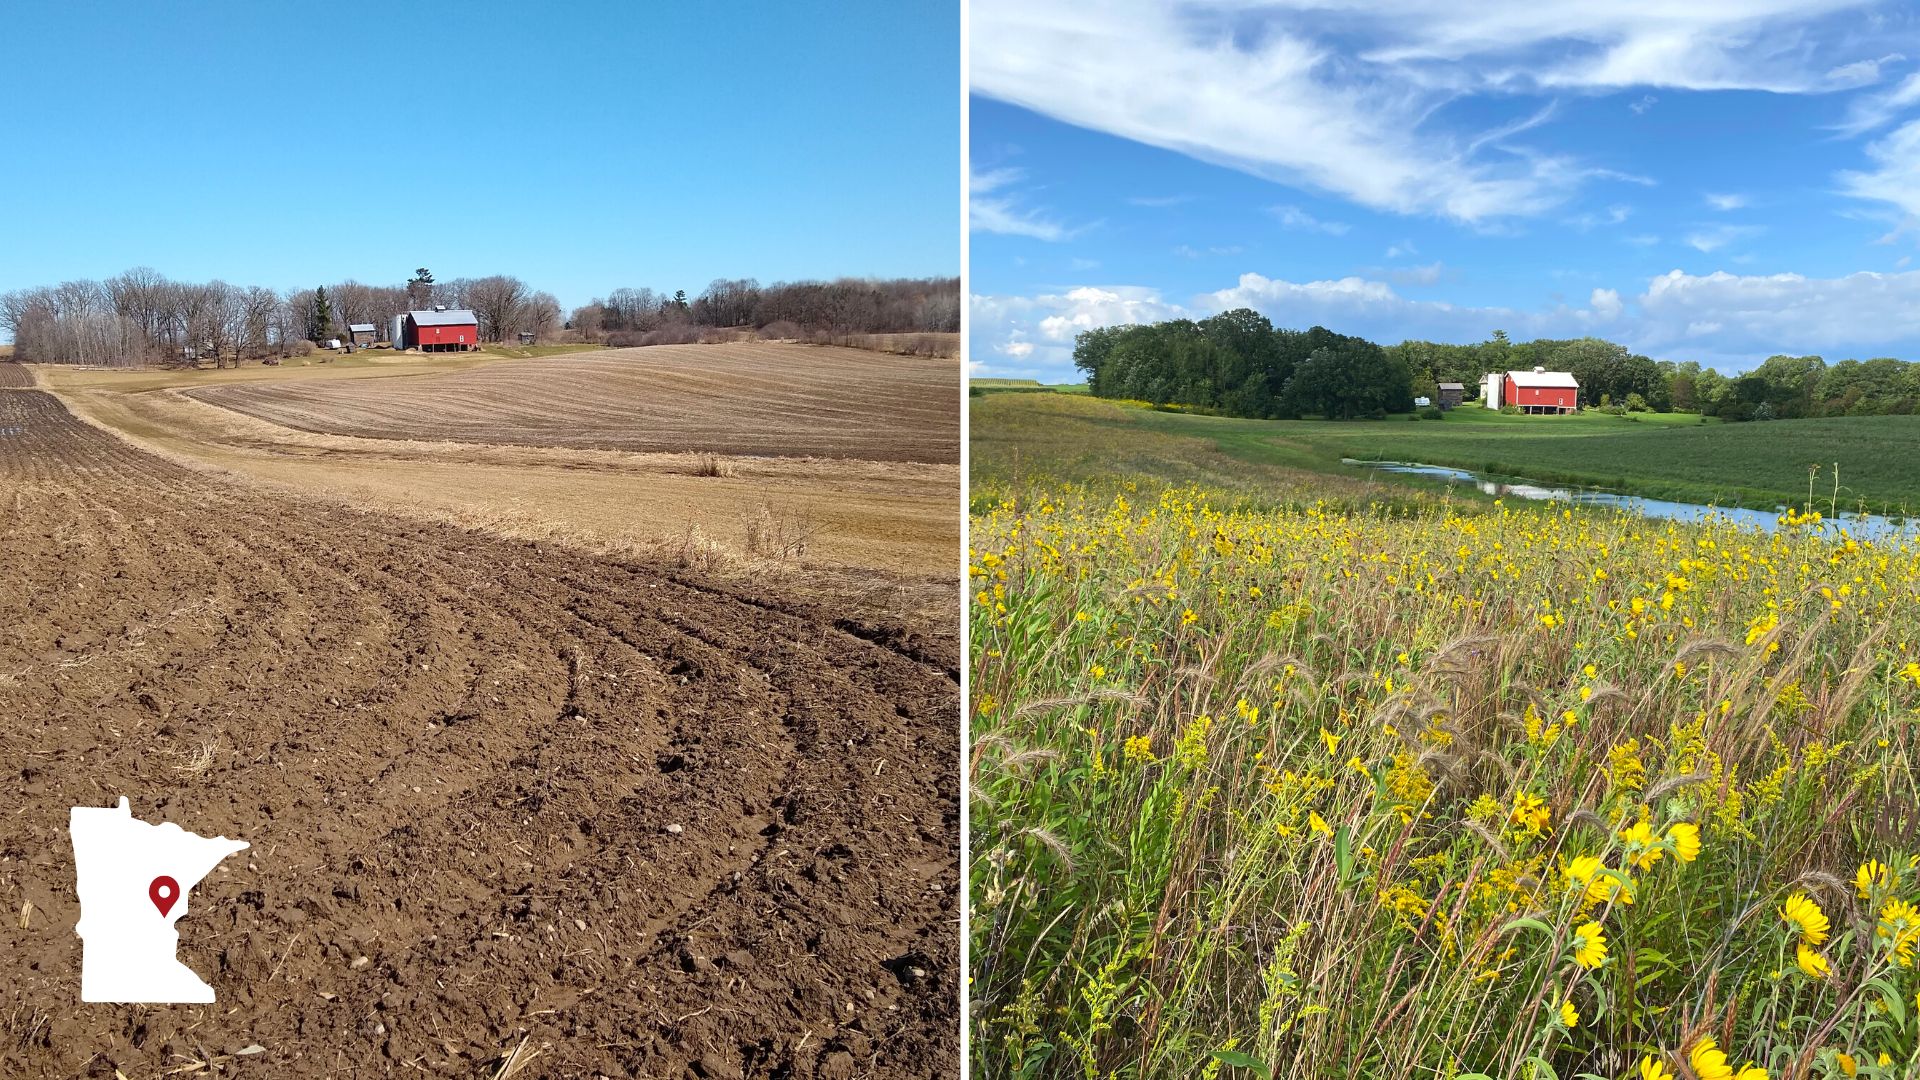 A side by side before and after image showing a barren, plowed farm field with a red barn in the background beside a prairie teeming with yellow flowers and a small pond